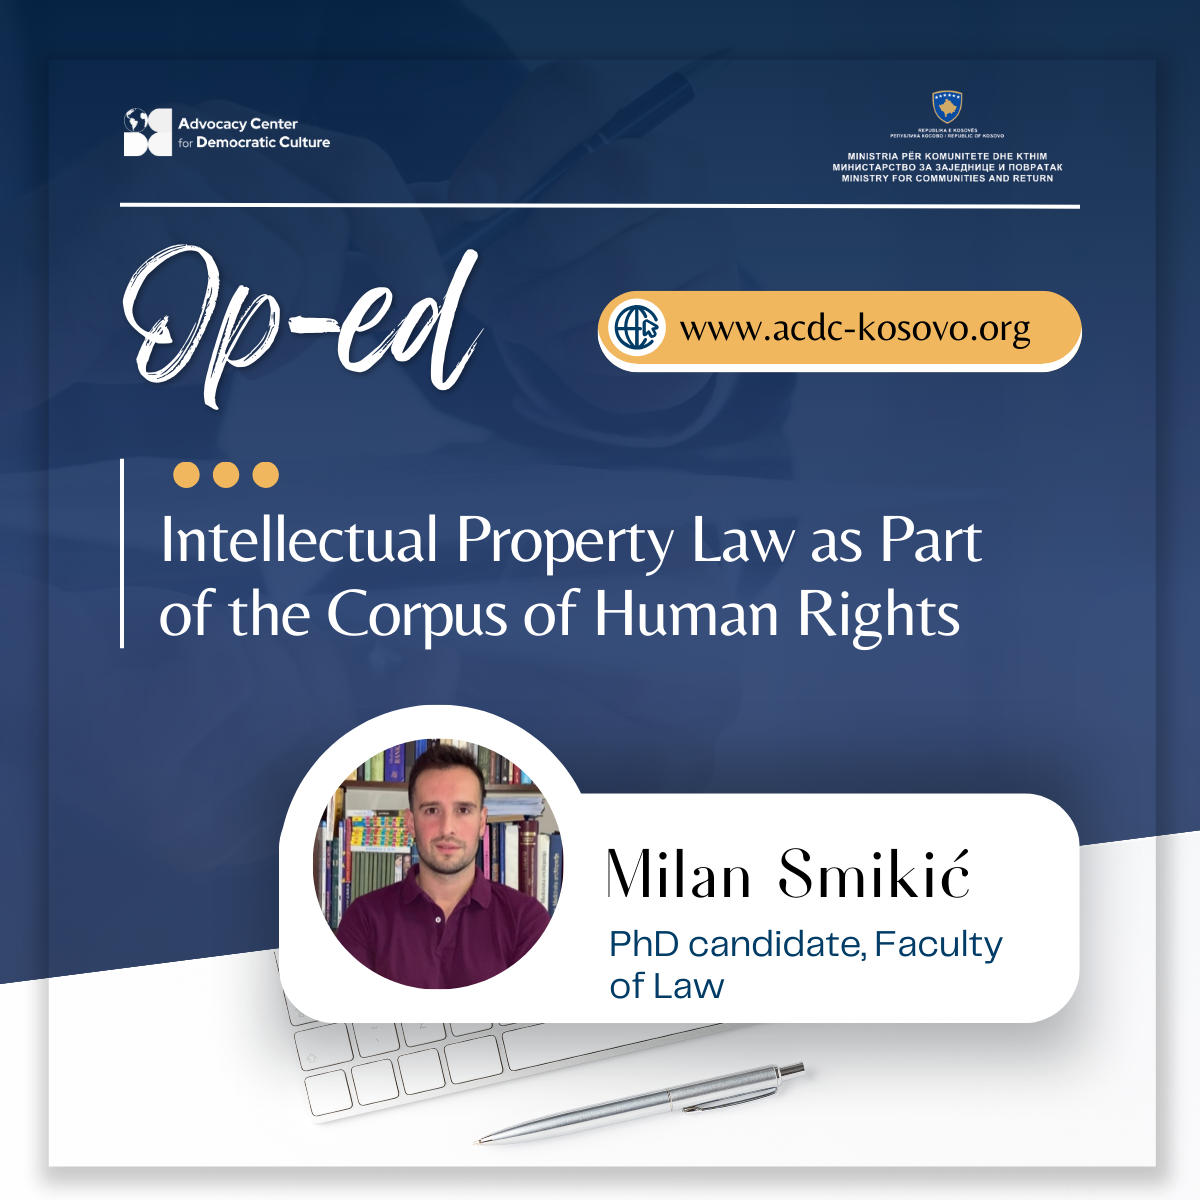 op-ed-intellectual-property-law-as-part-of-the-corpus-of-human-rights